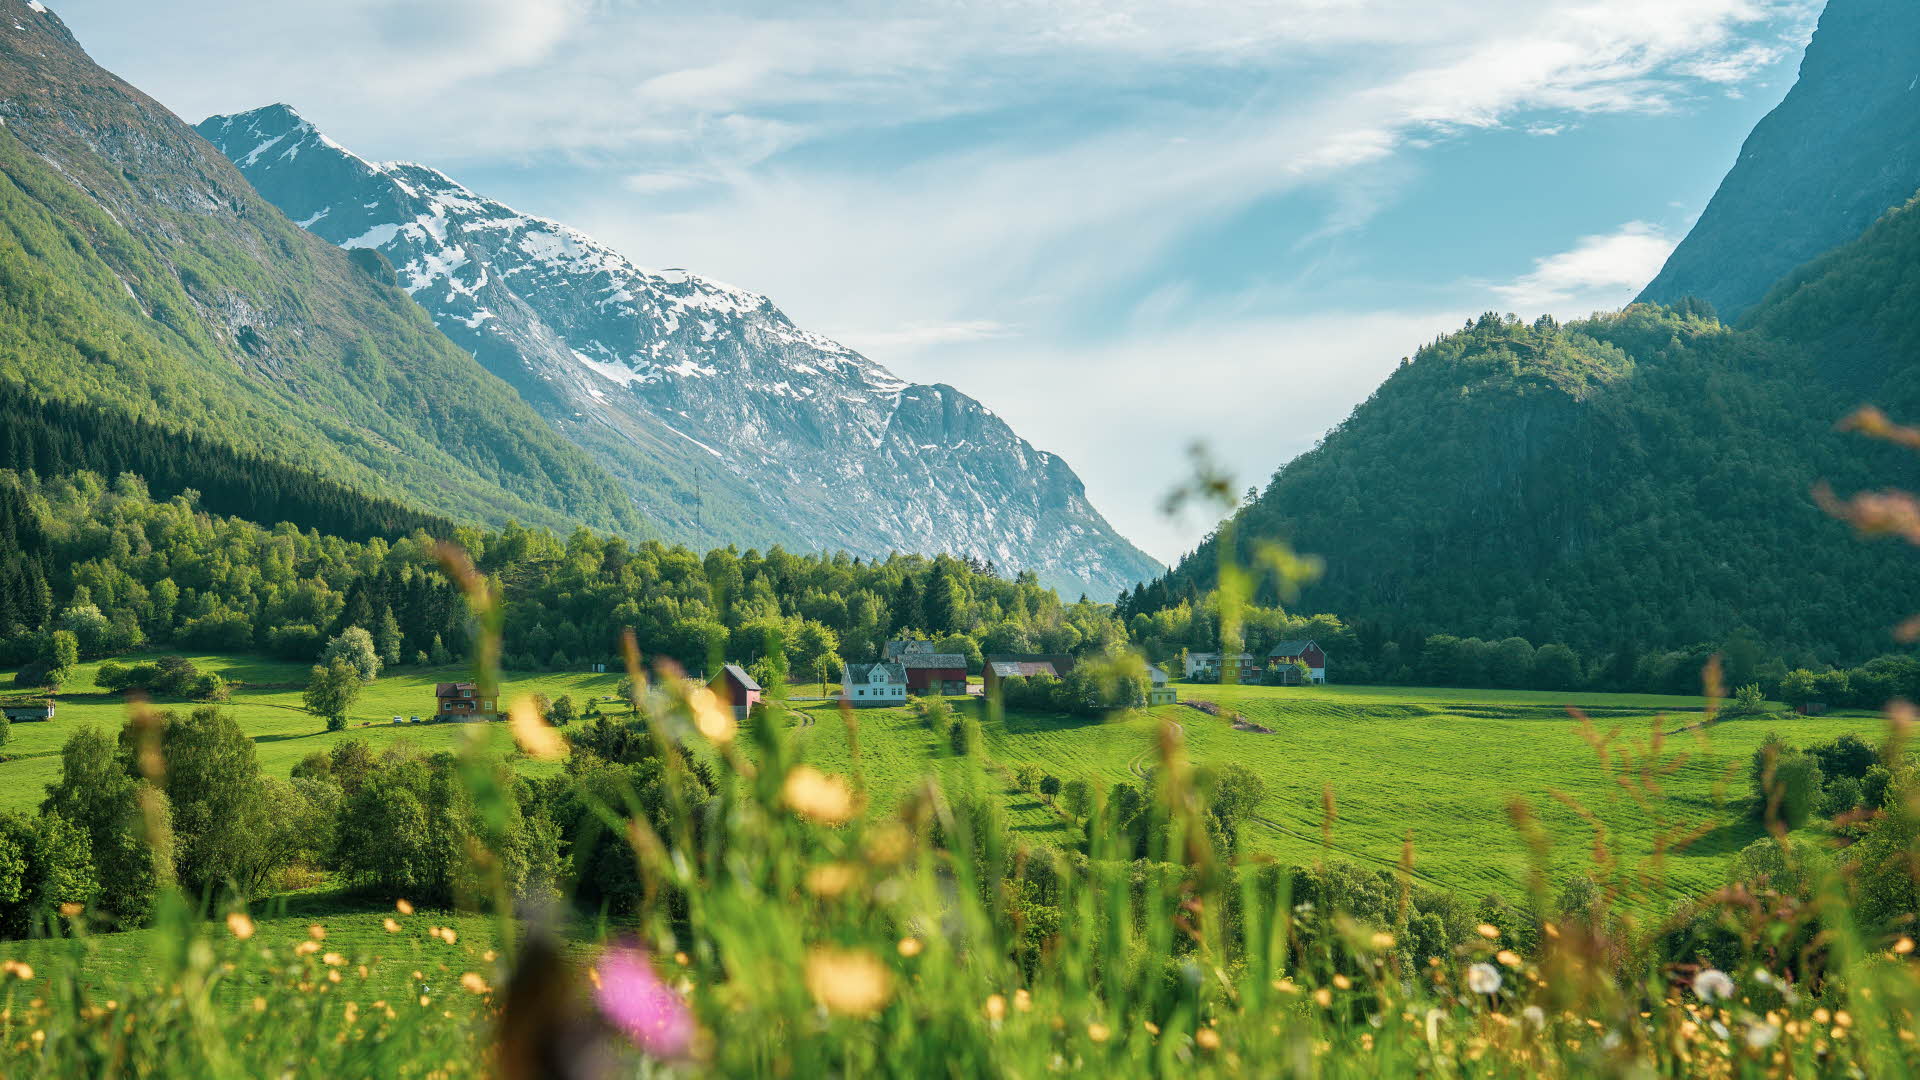 Flowers, green fields, a farm and steep mountains in Sunnmøre region in Norway.